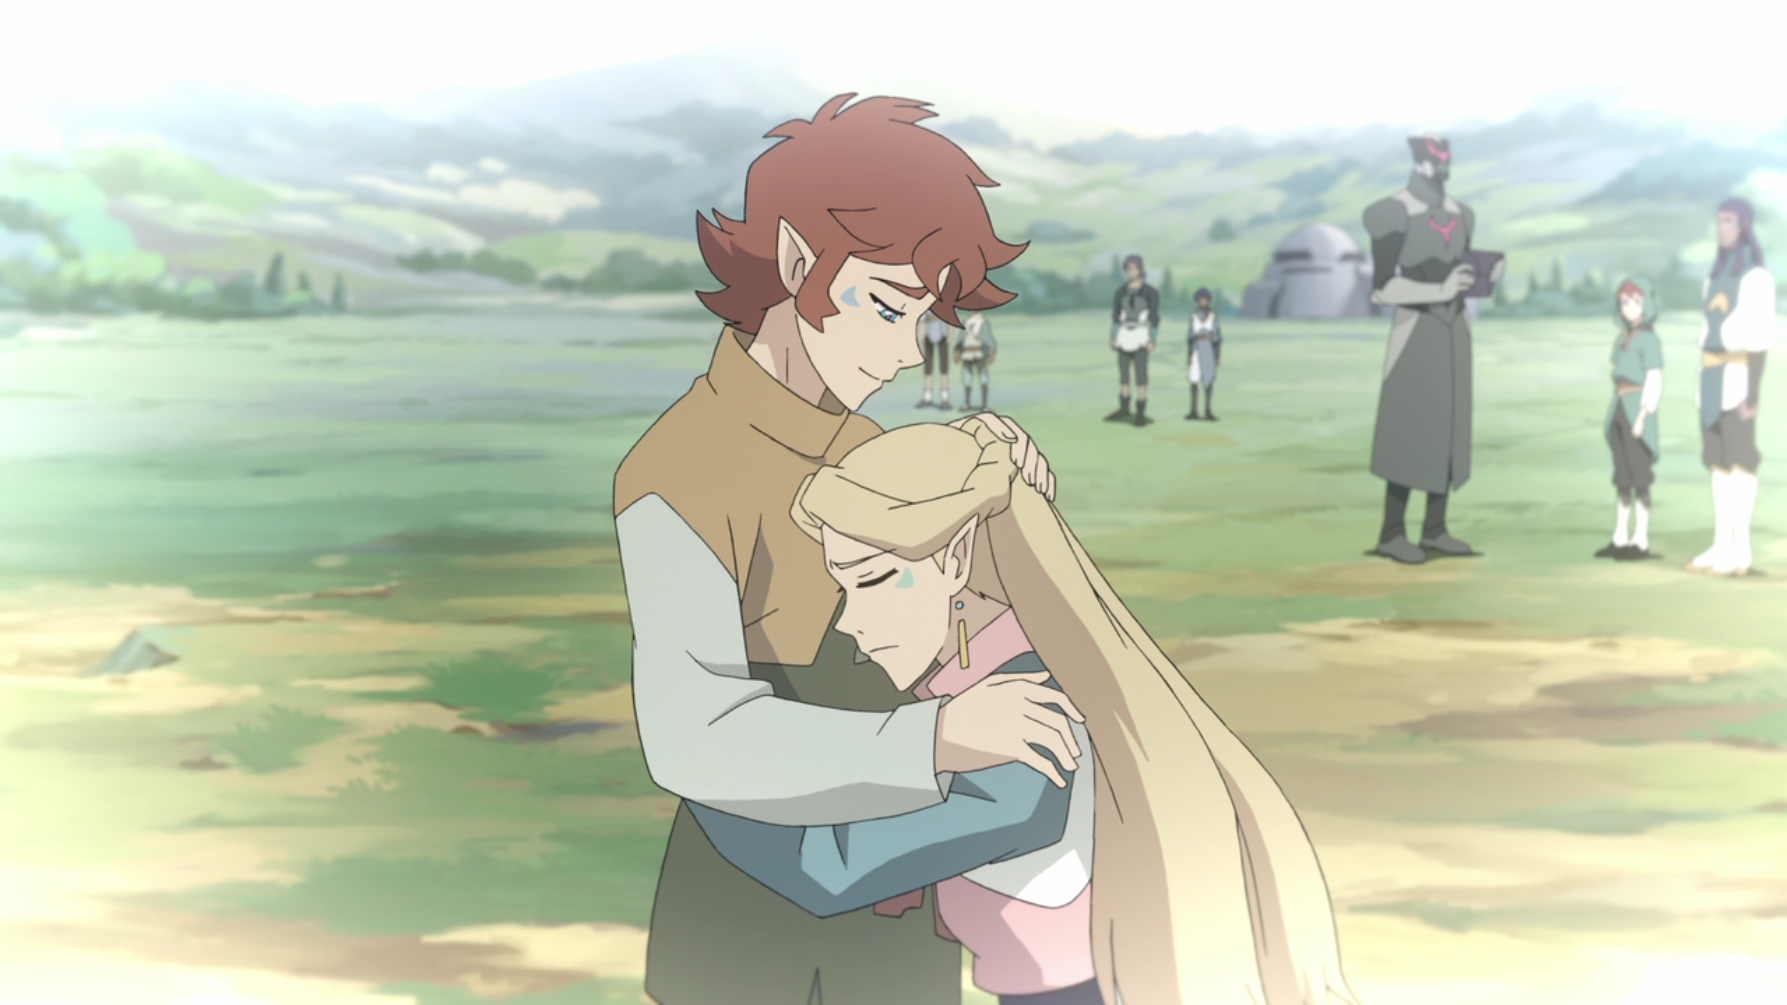 Romelle and her brother, Bandor sharing a goodbye hug from Voltron Legendary Defender. Voltron legendary defender, Voltron, Dreamworks animation